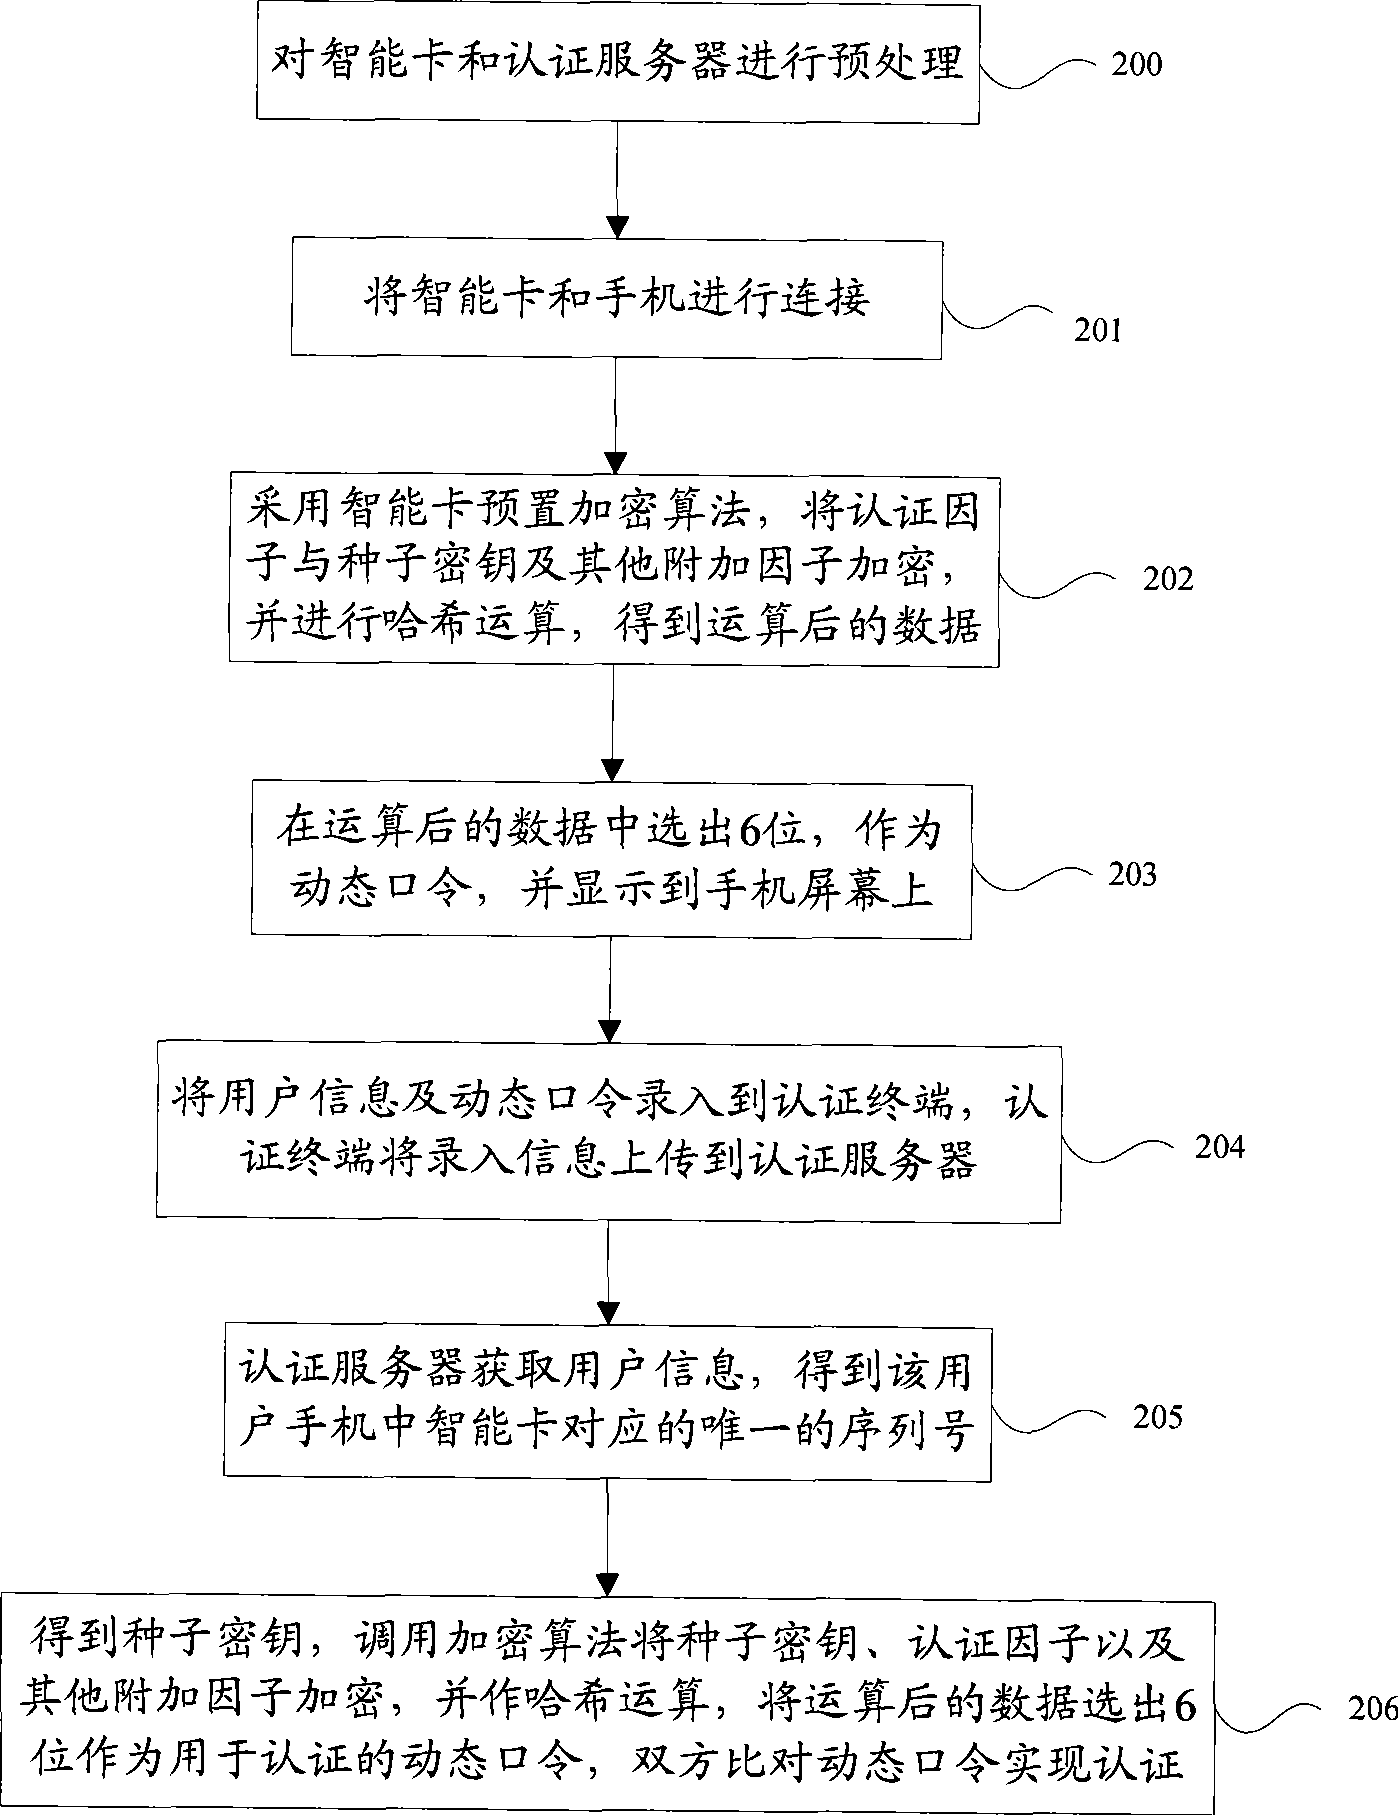 Method and system for implementing dynamic identity authentication